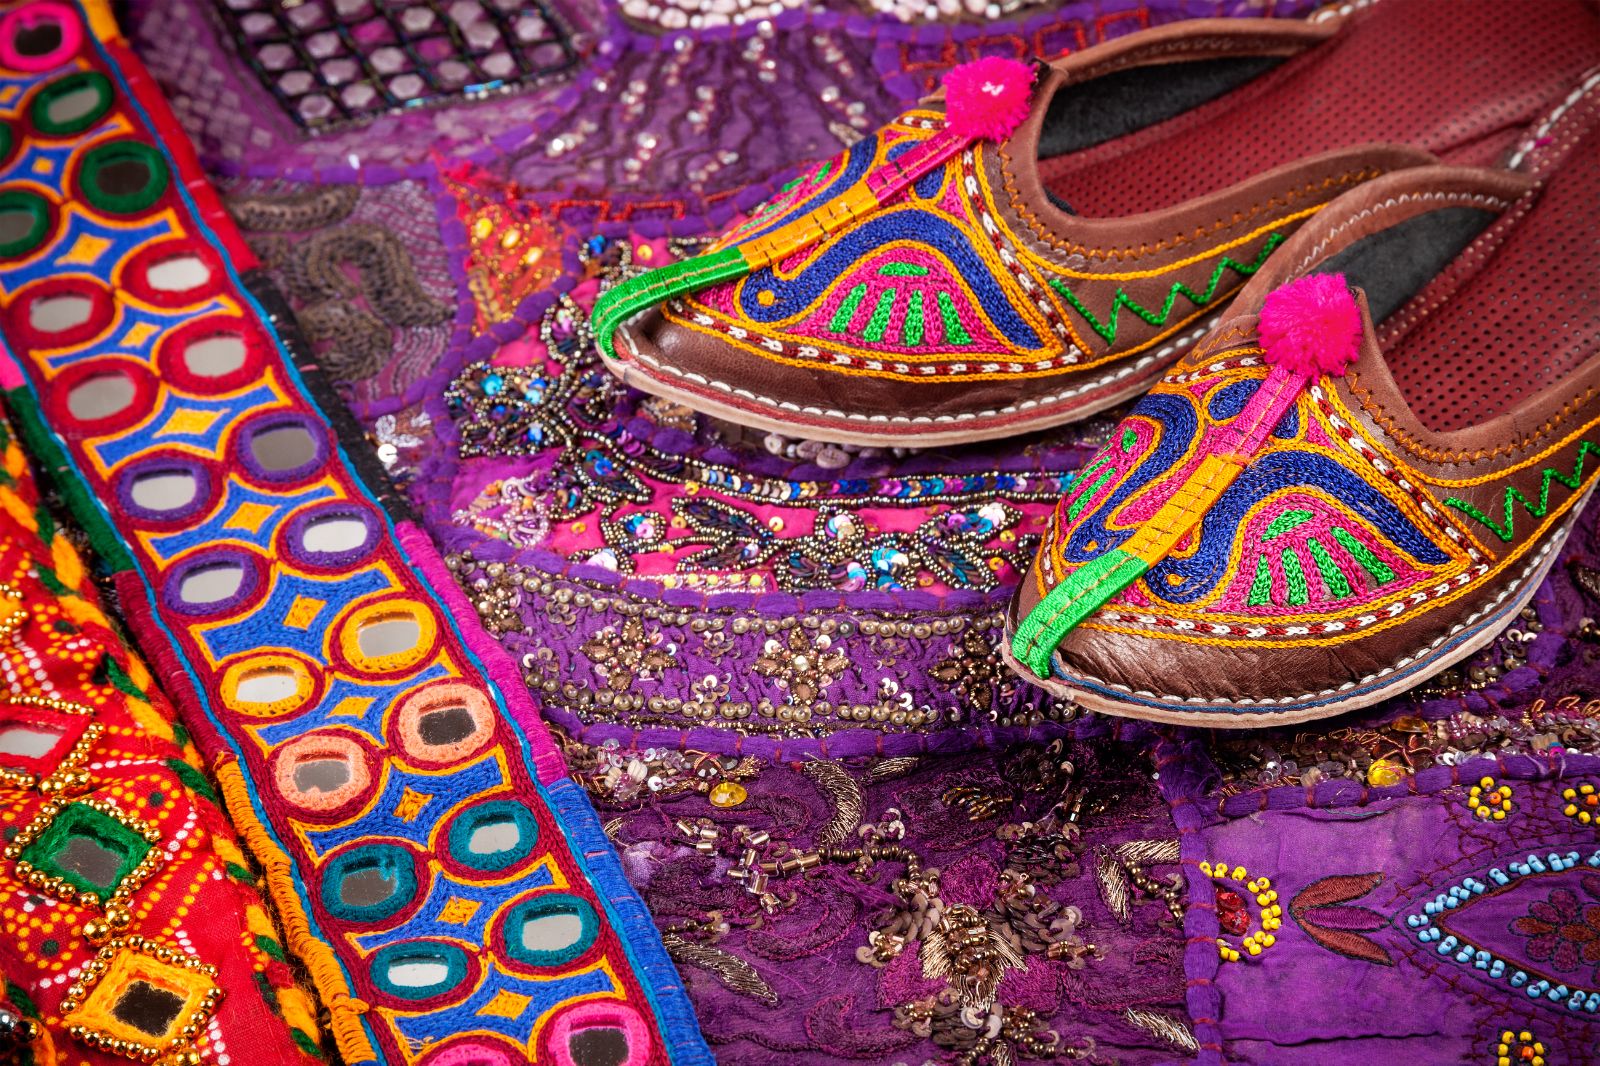 Colourful ethnic shoes and belts at flea market in Rajasthan India